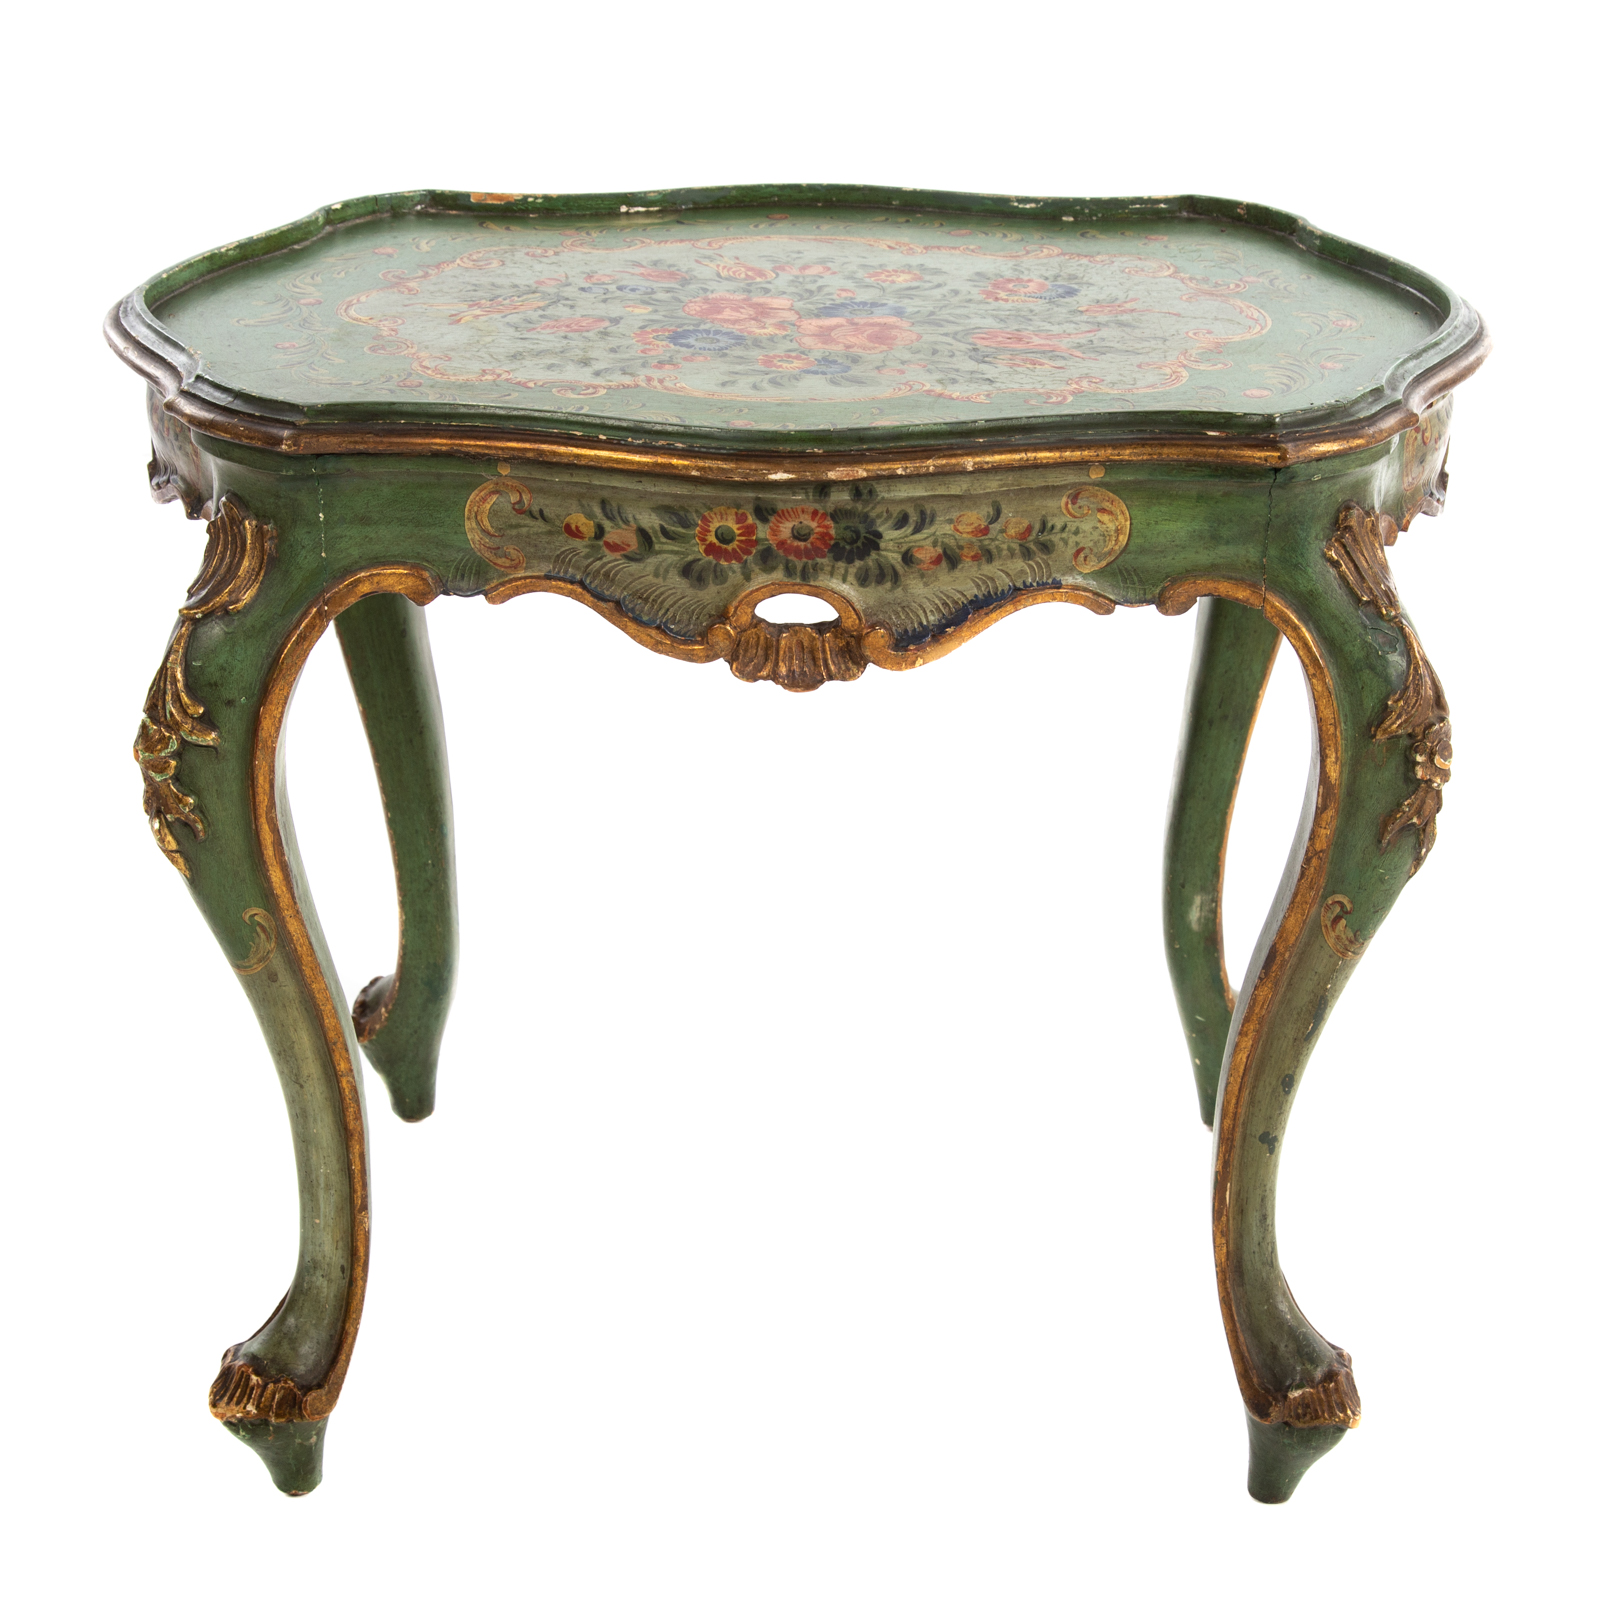 LOUIS XV STYLE PAINTED WOOD SIDE 3698b4